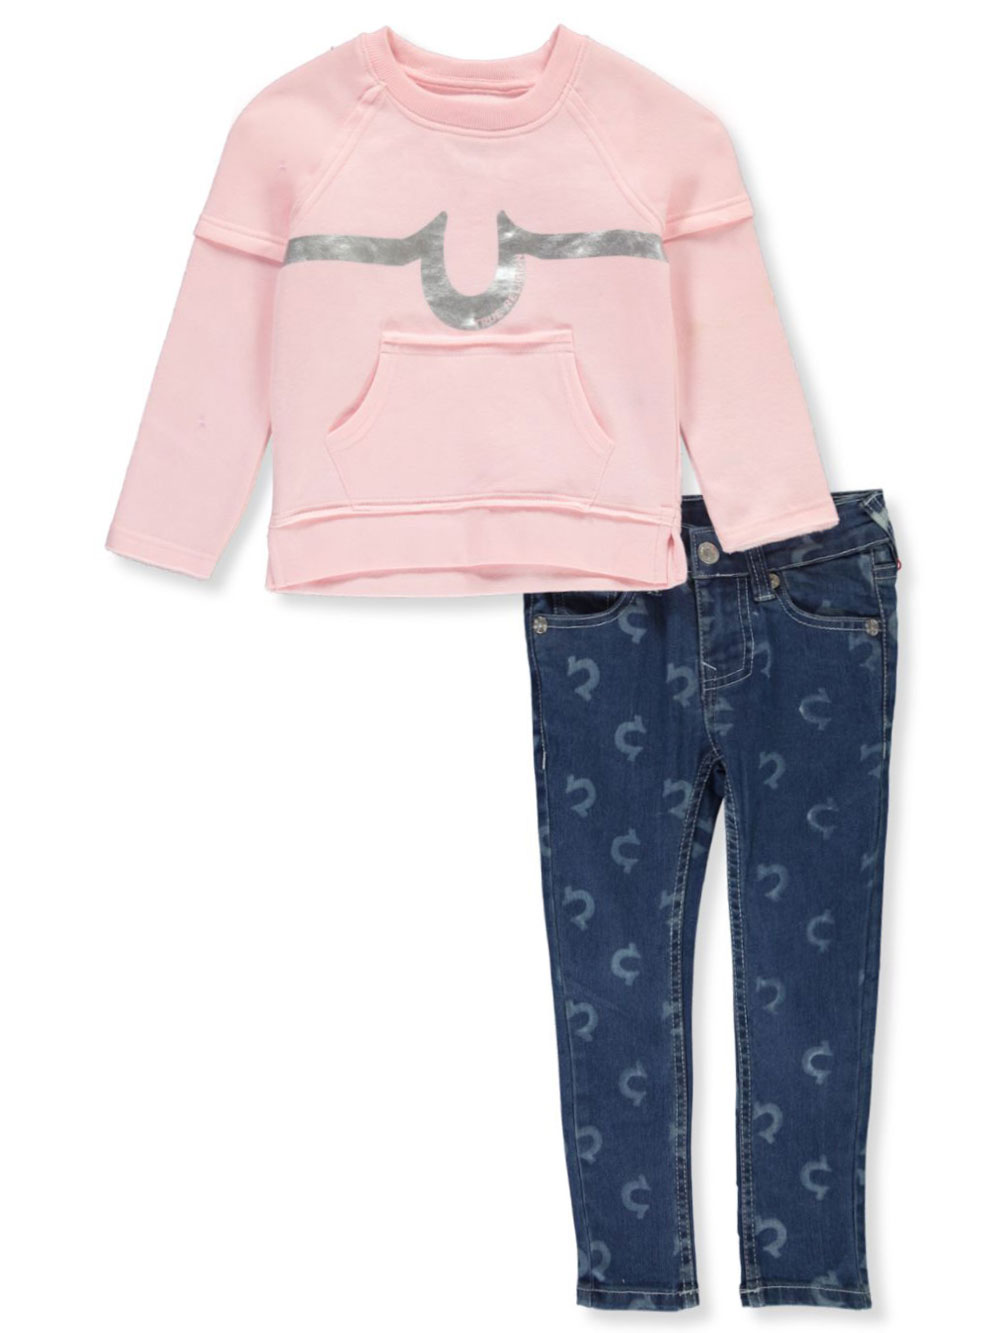 Baby Girls' 2-Piece Jeans Set Outfit by 